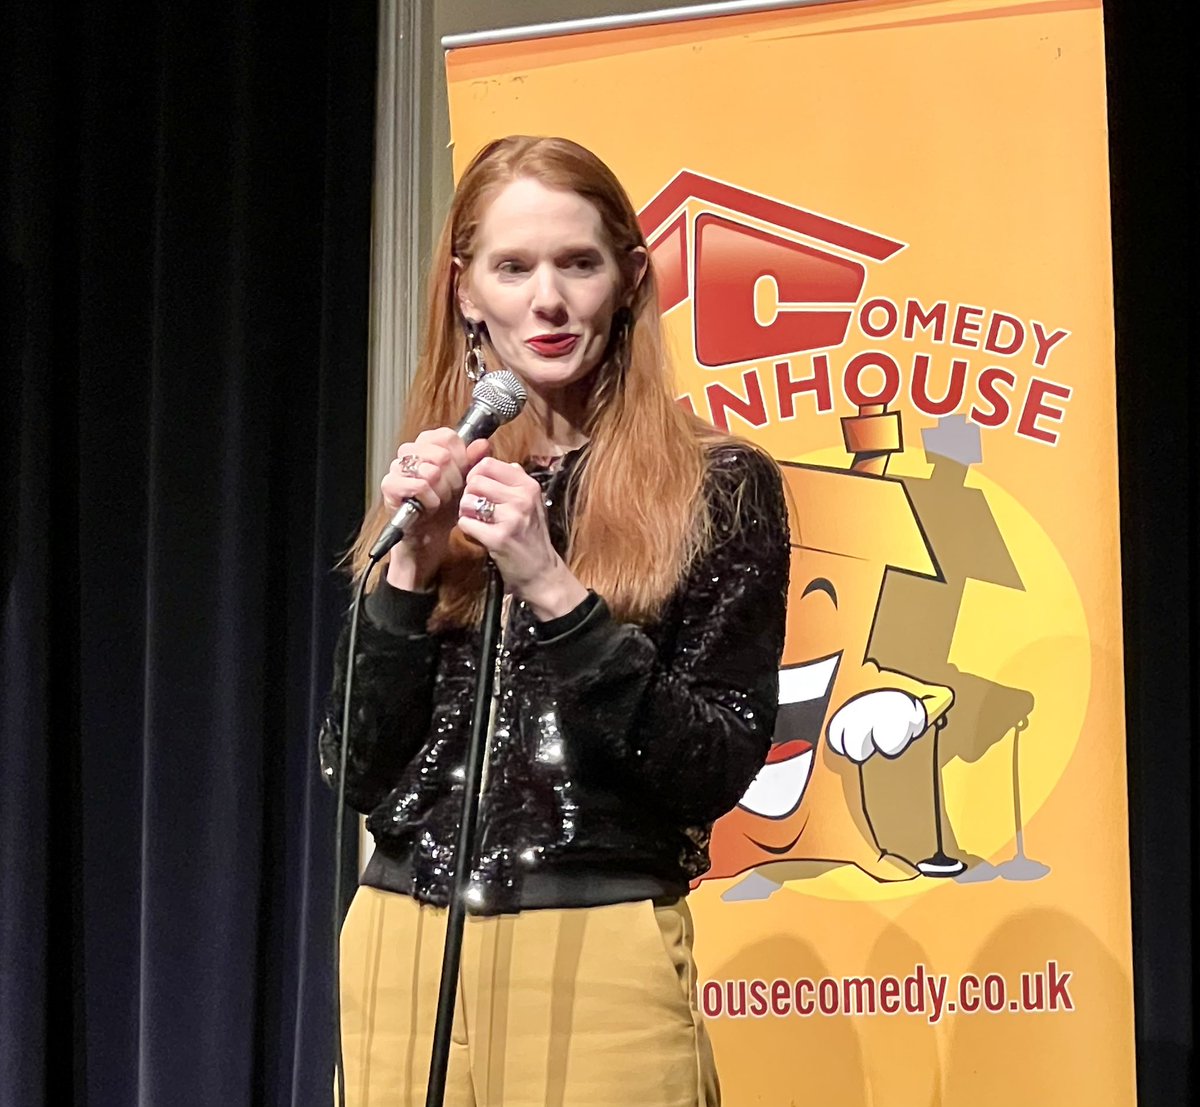 Start your weekend with laughter at #MelbourneSportingPartnership on Fri Apr 5th with @dianespencerfun @TheRealSteveDay Nathan Eagle and Compere @PatrickDraper7 Tickets here: funhousecomedy.co.uk/venues/melbour…